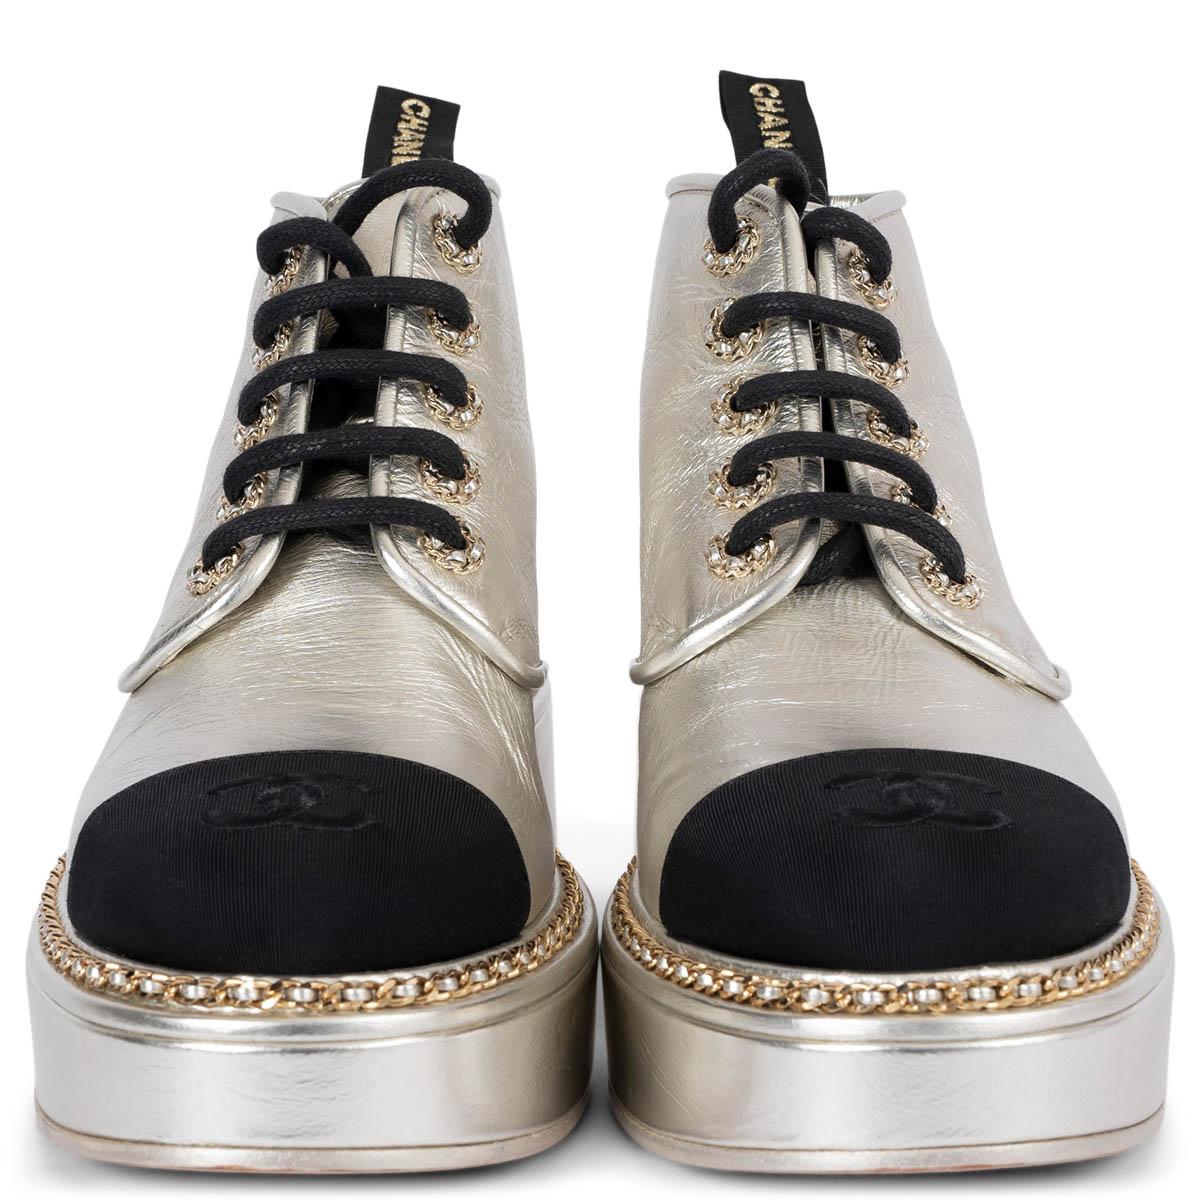 100% authentic Chanel platform lace-up ankle Booties in metallic silver leather embellished with a gold-tone chain, chain eyelets and classic black grosgrain cap toe. Have been worn once inside and are in virtually new condition. Come with dust bag.